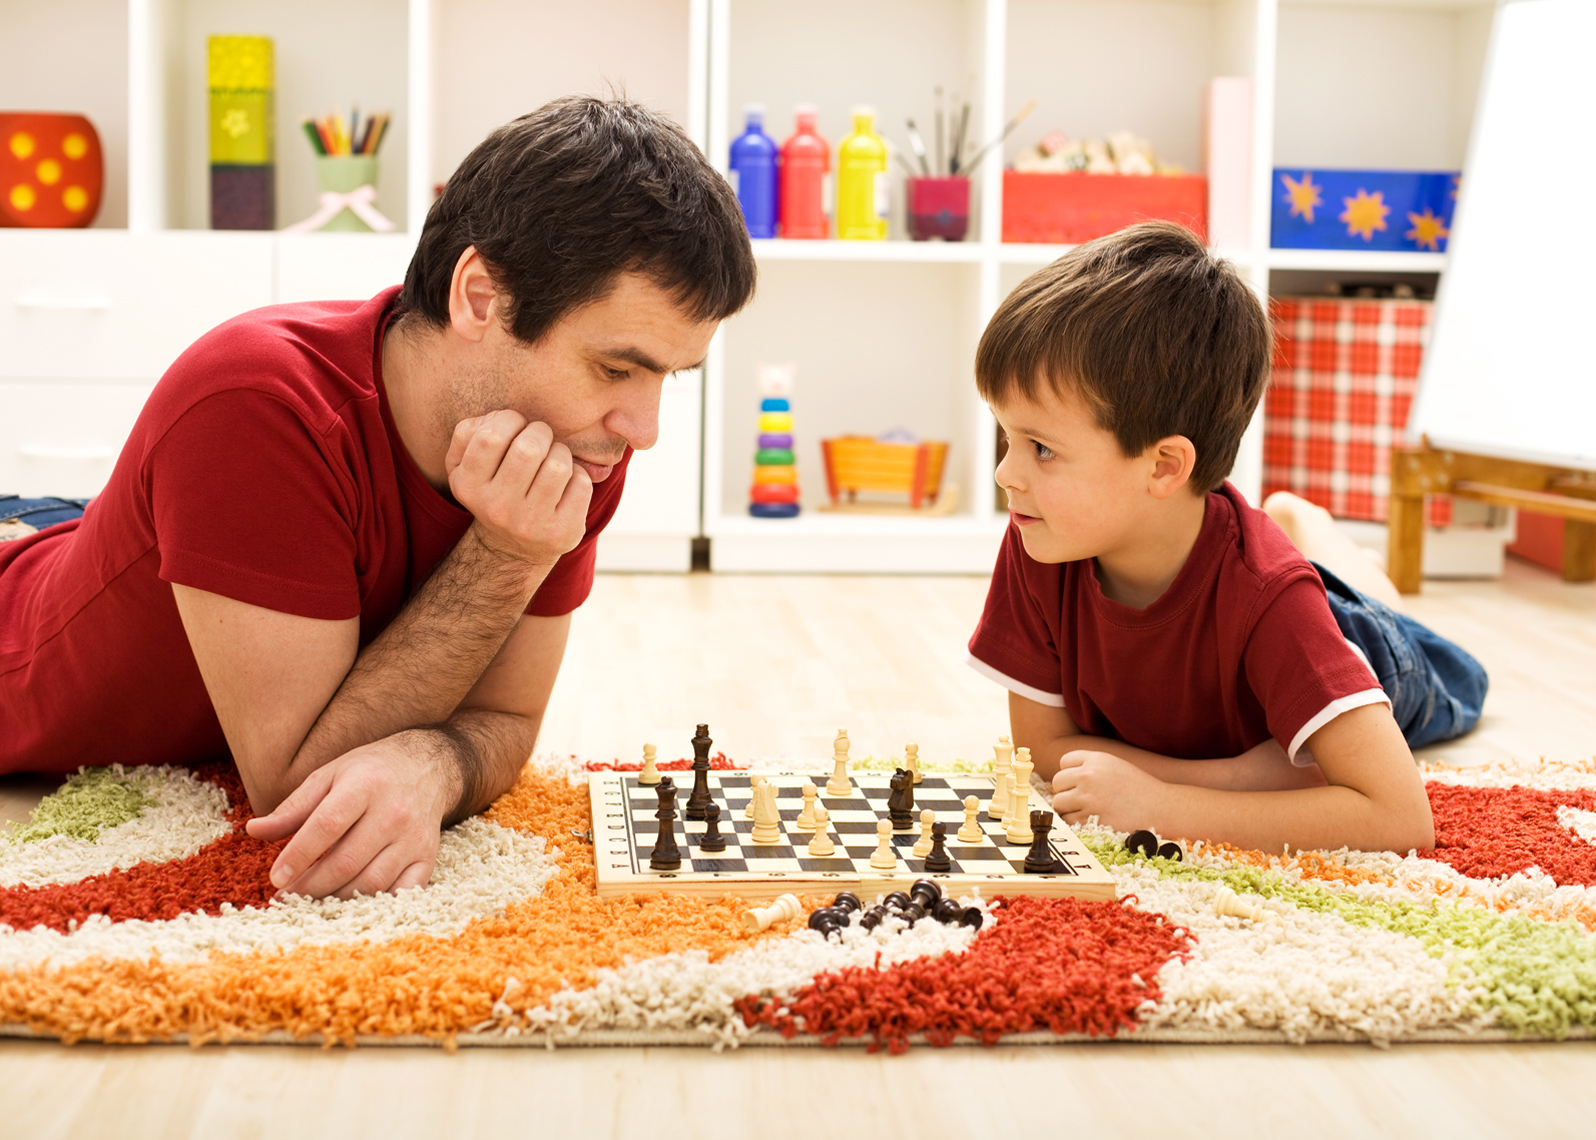 Man teaching boy the rules of chess - playing on the floor in the kids room